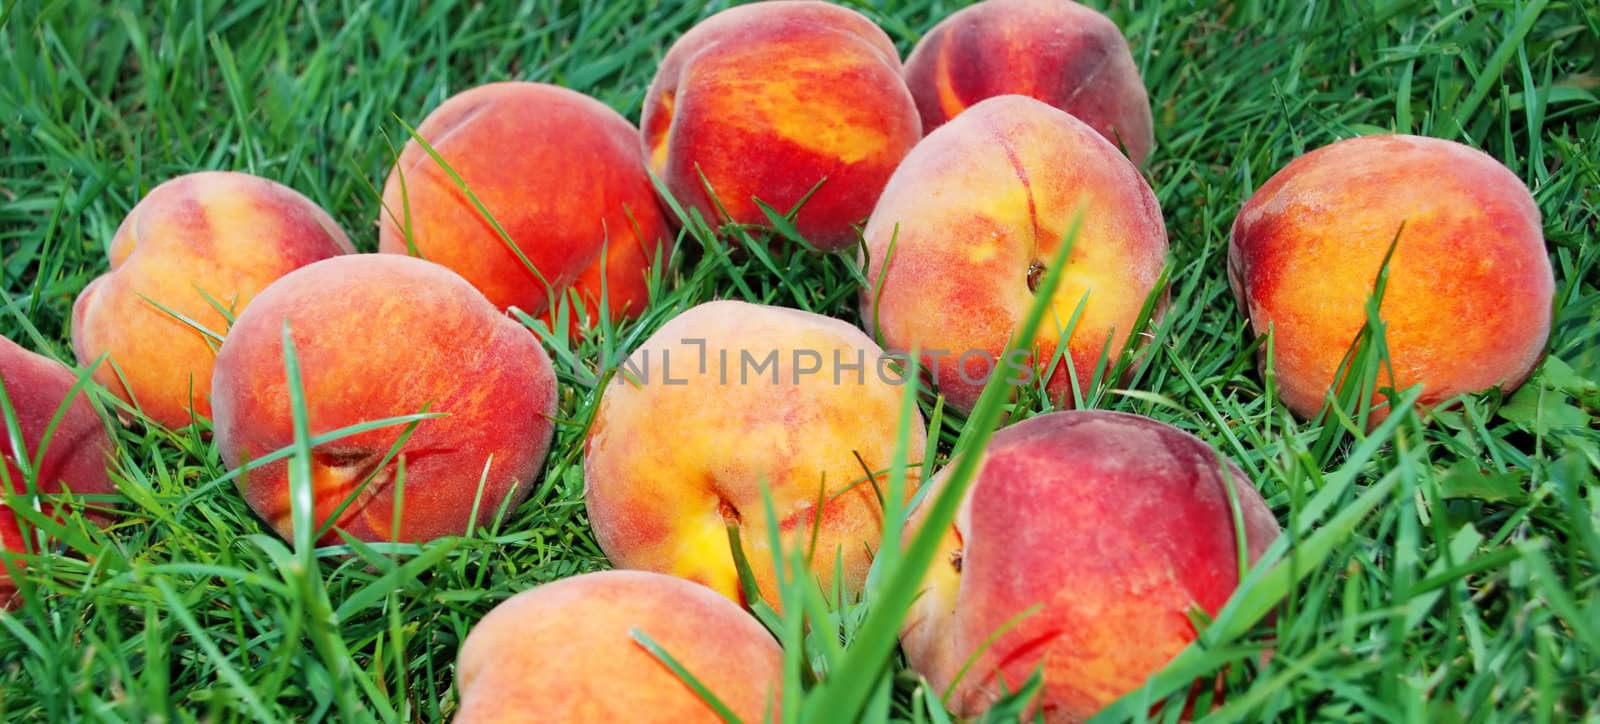 Peach over grass by simply